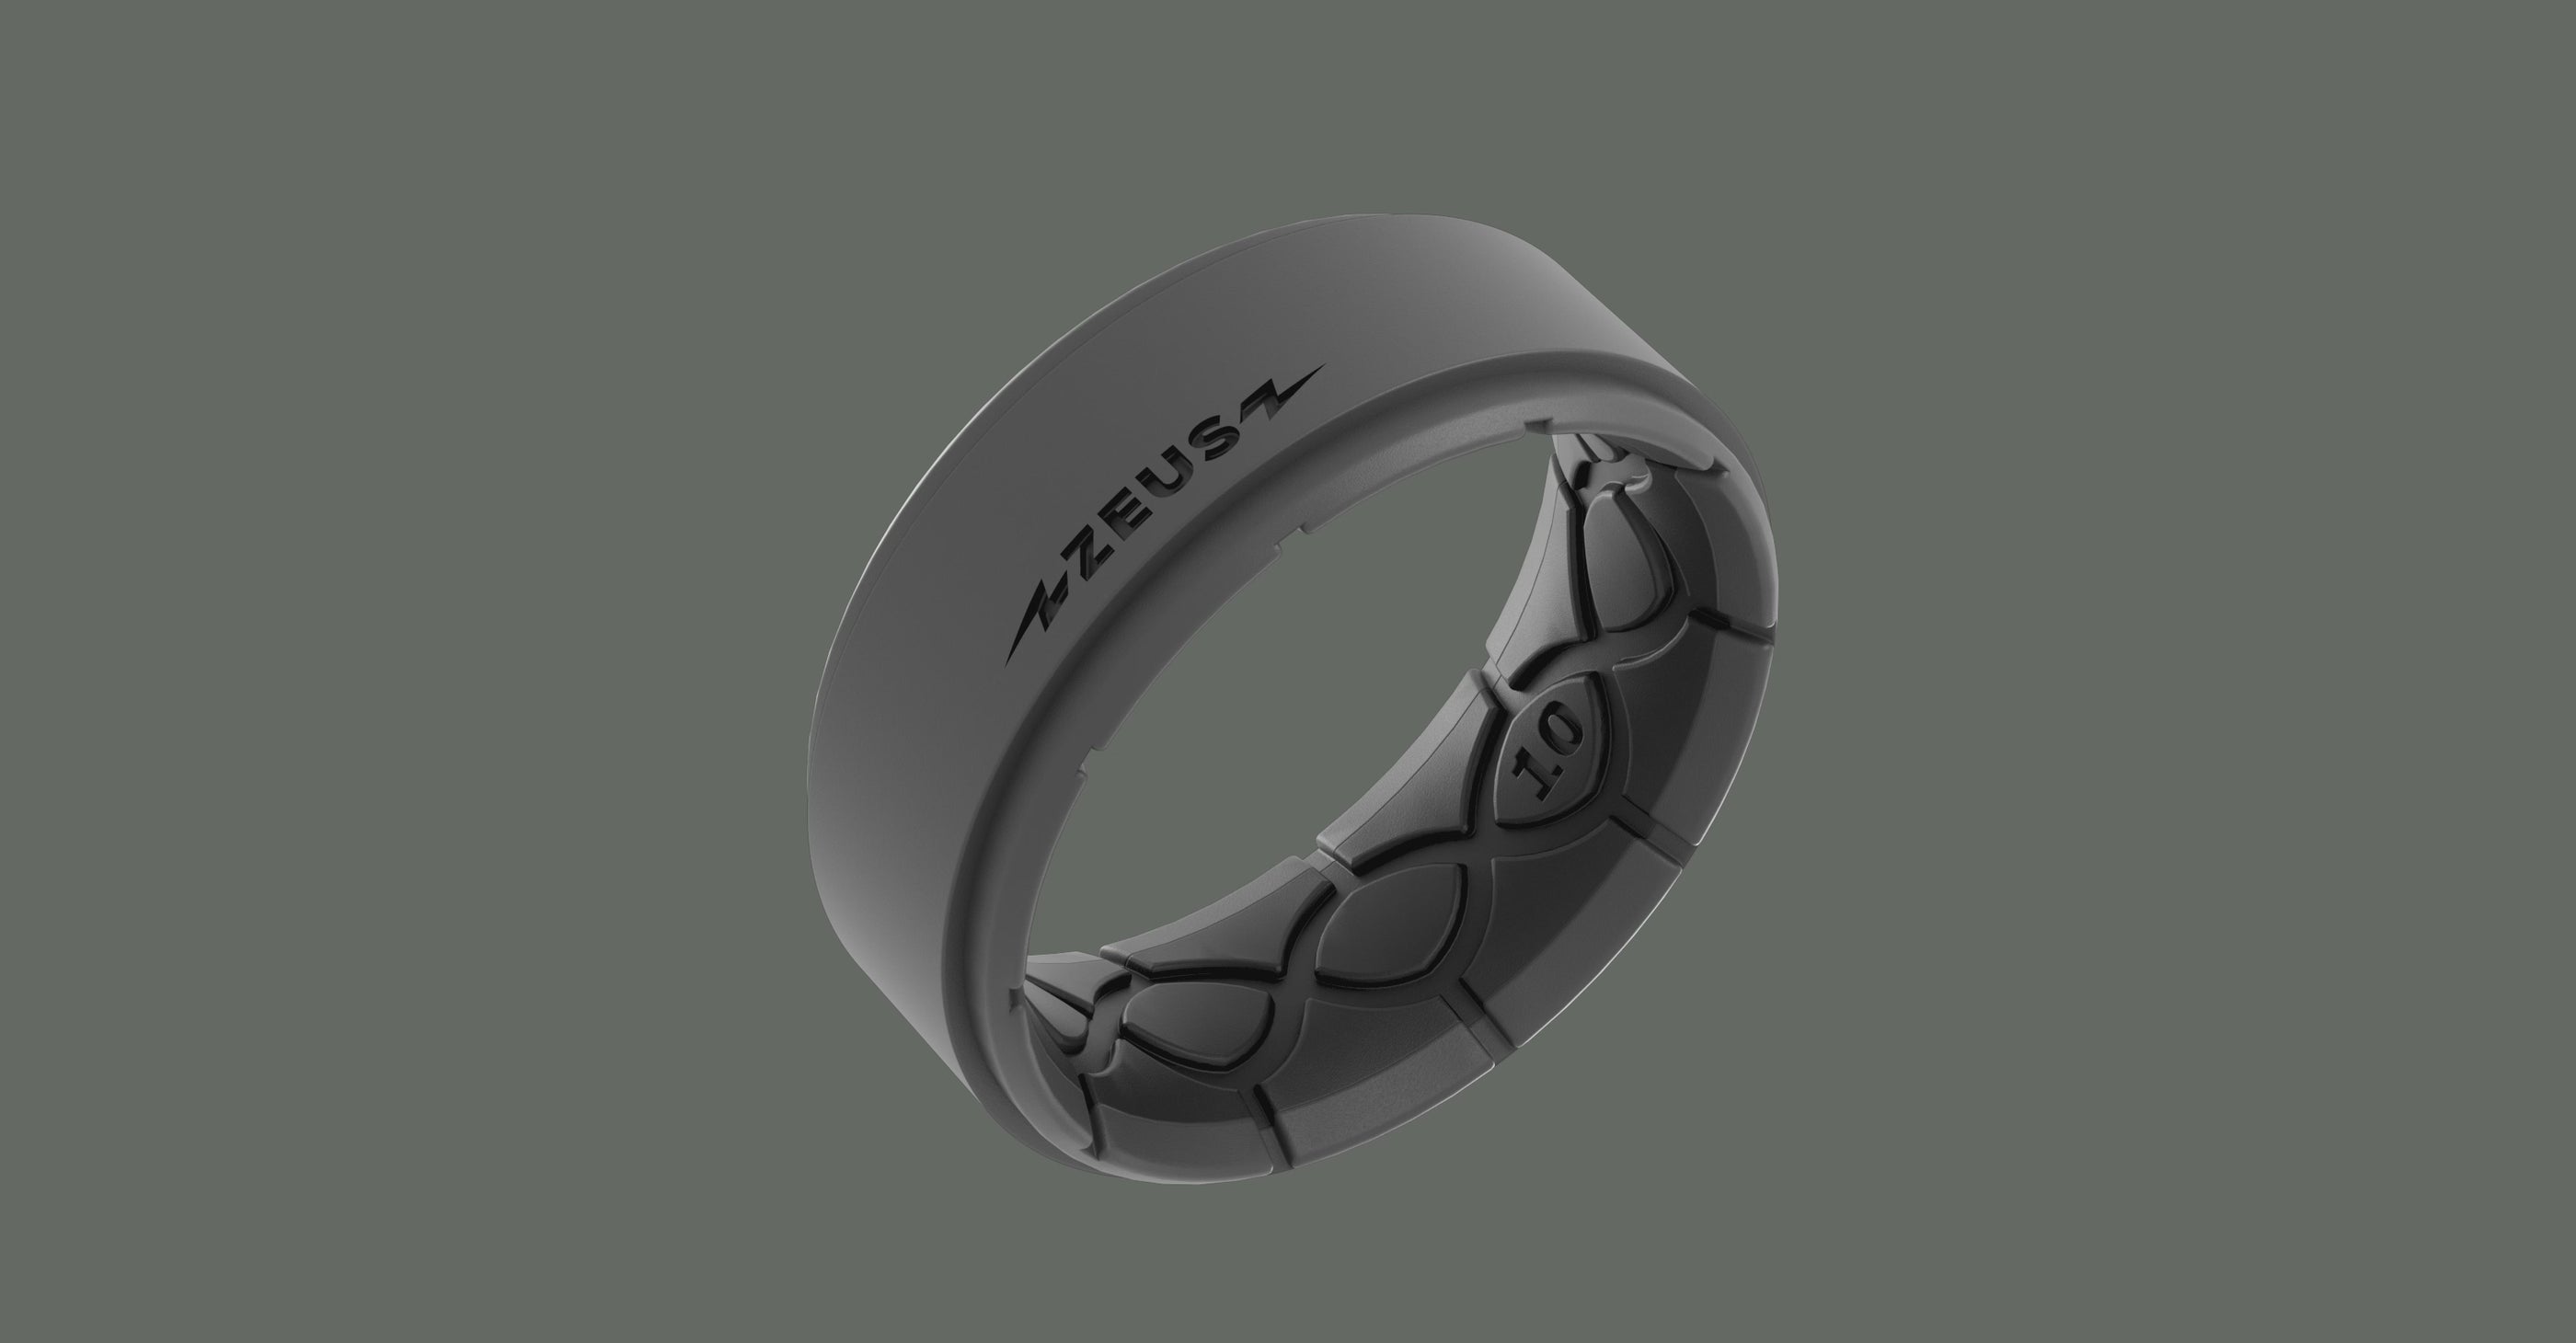 Groove Life Zeus Hammered Gun Metal Silicone Ring, Size 11